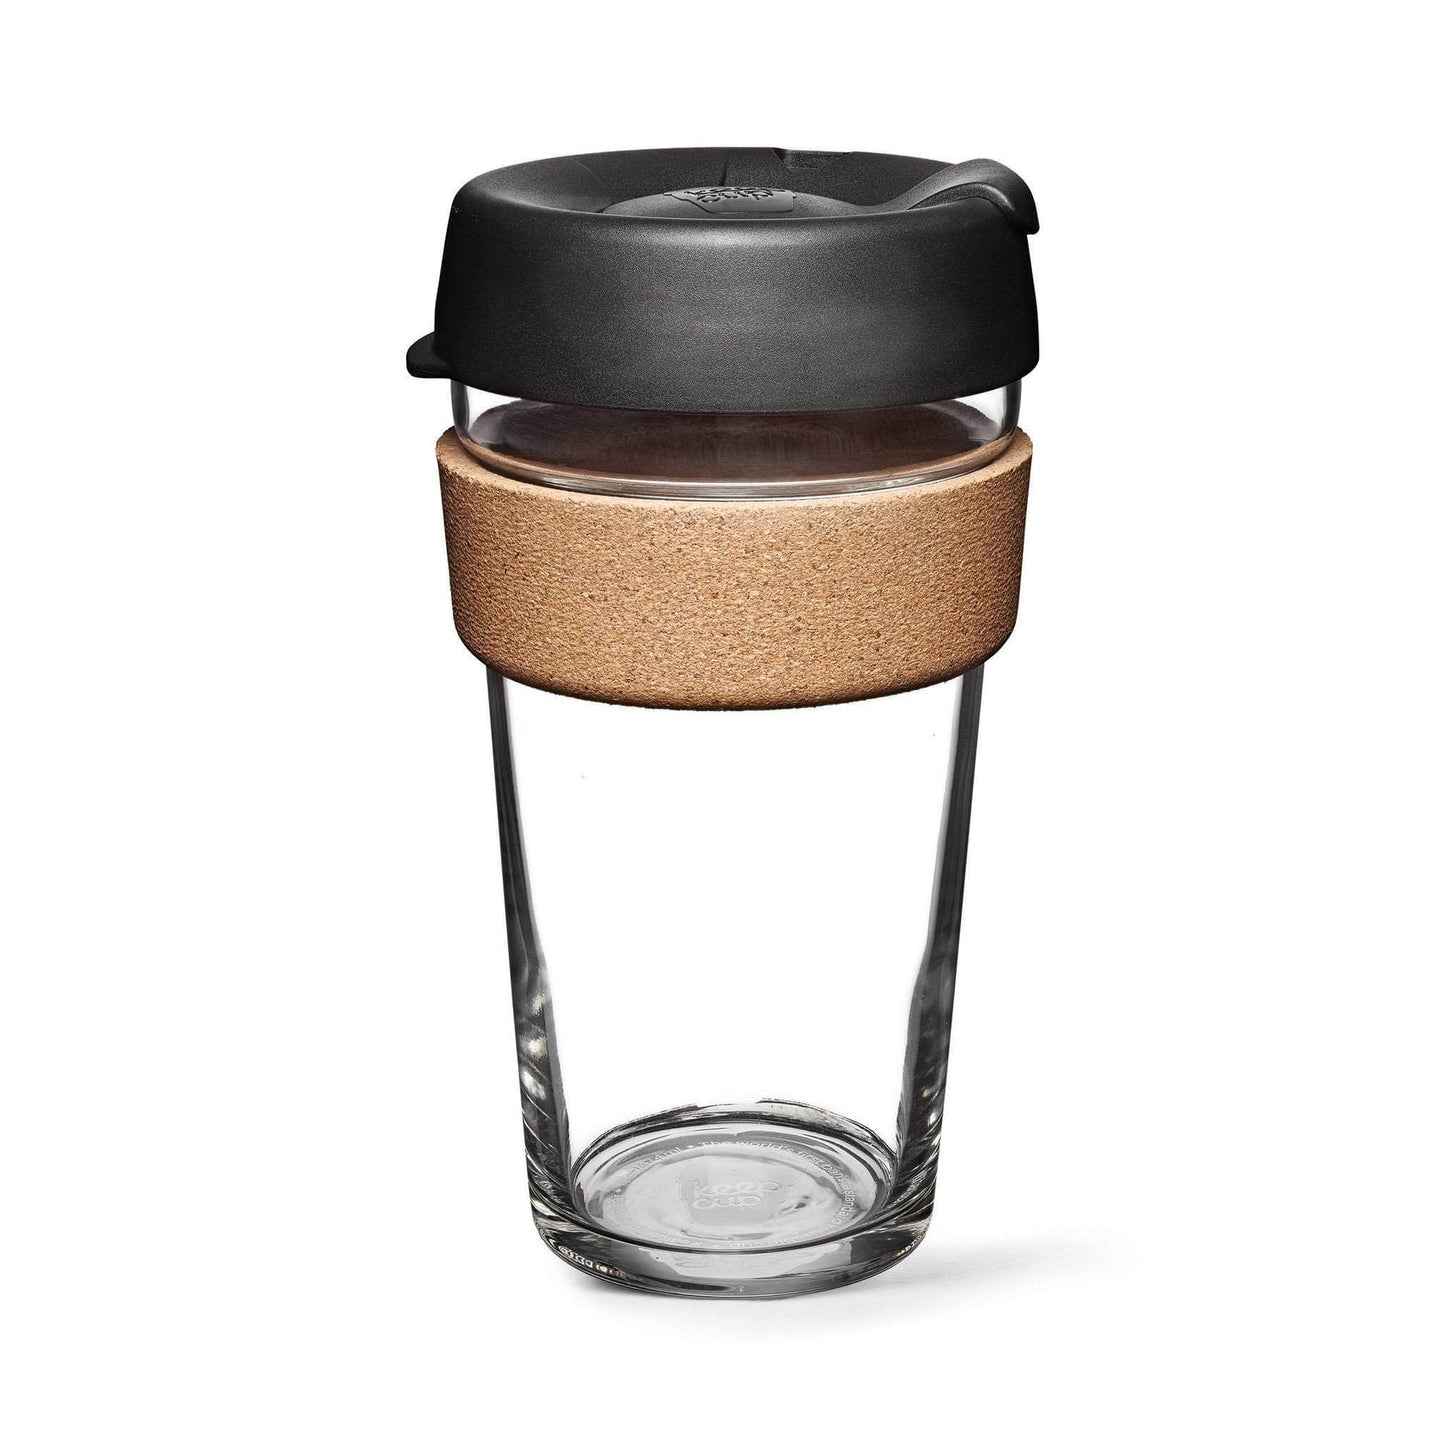 Keepcup Brew Cork Coffee Cups Keepcup Brew 16oz Glass Coffee Cup With Cork Band - Espresso